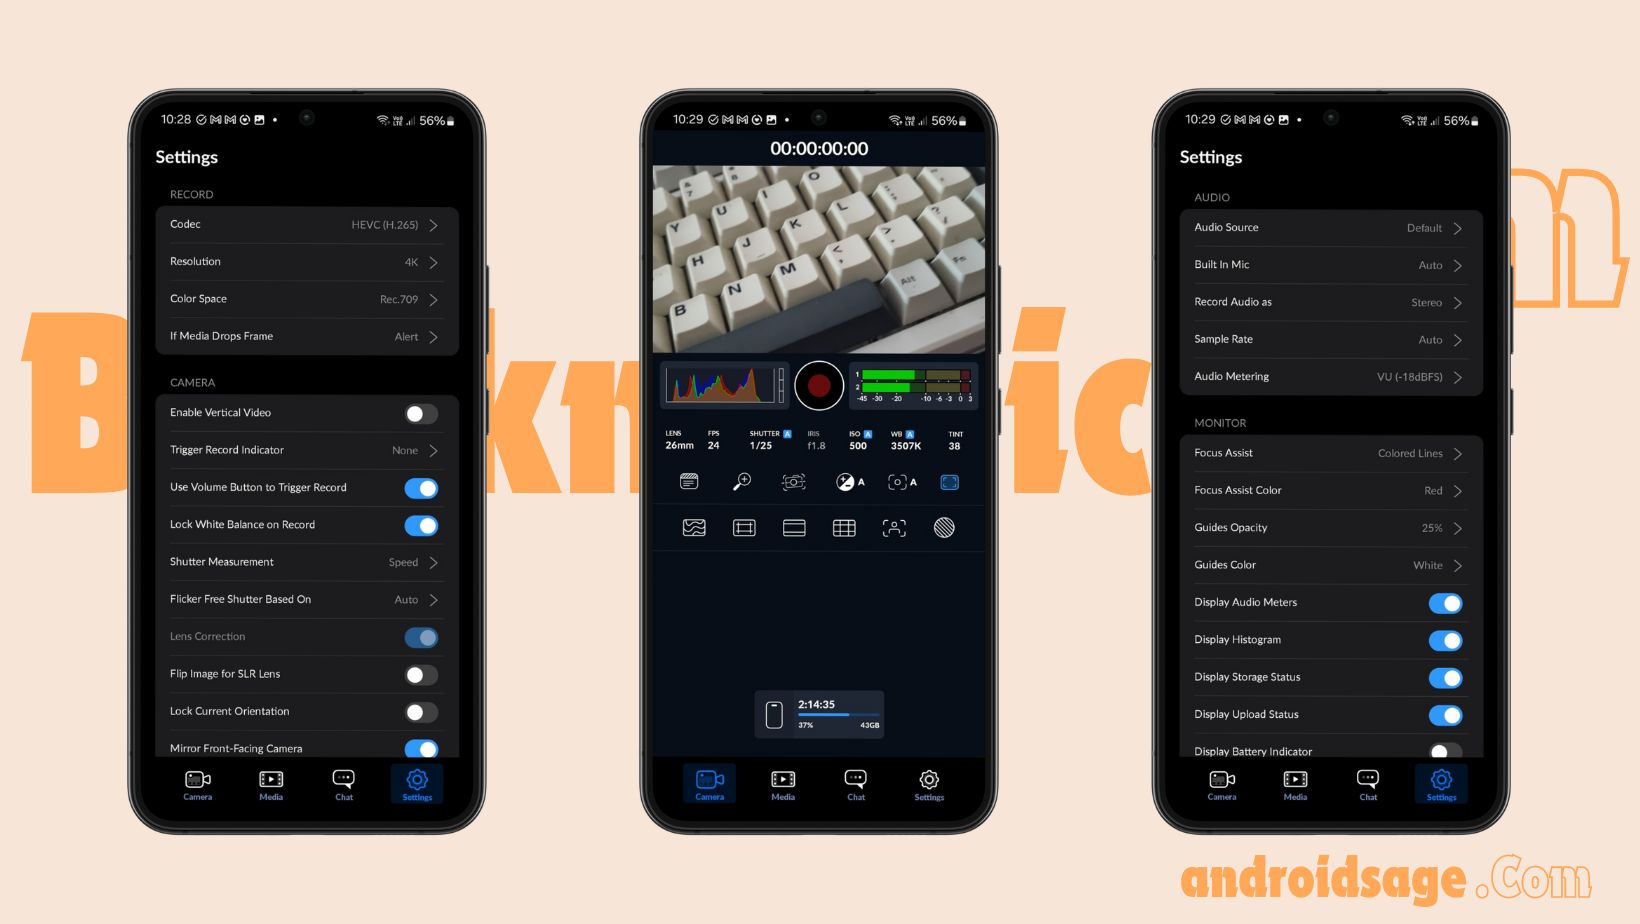 Latest Blackmagic Camera APK Download for all Android devices